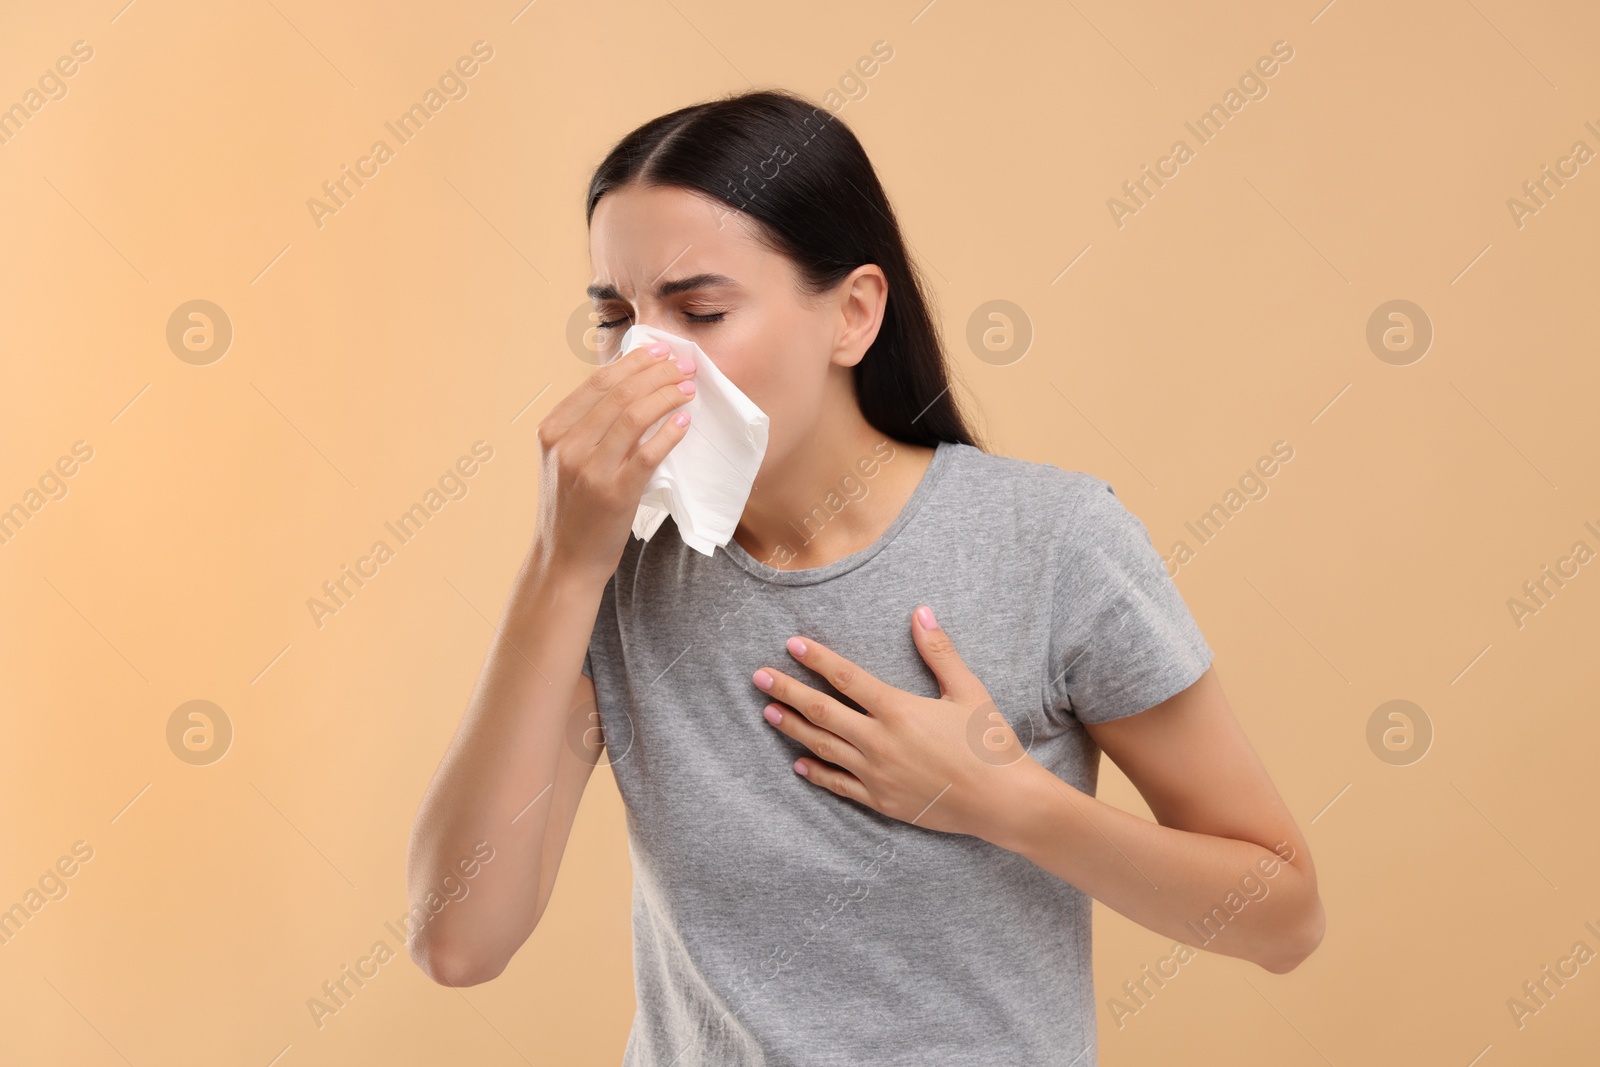 Photo of Suffering from allergy. Young woman blowing her nose in tissue on beige background